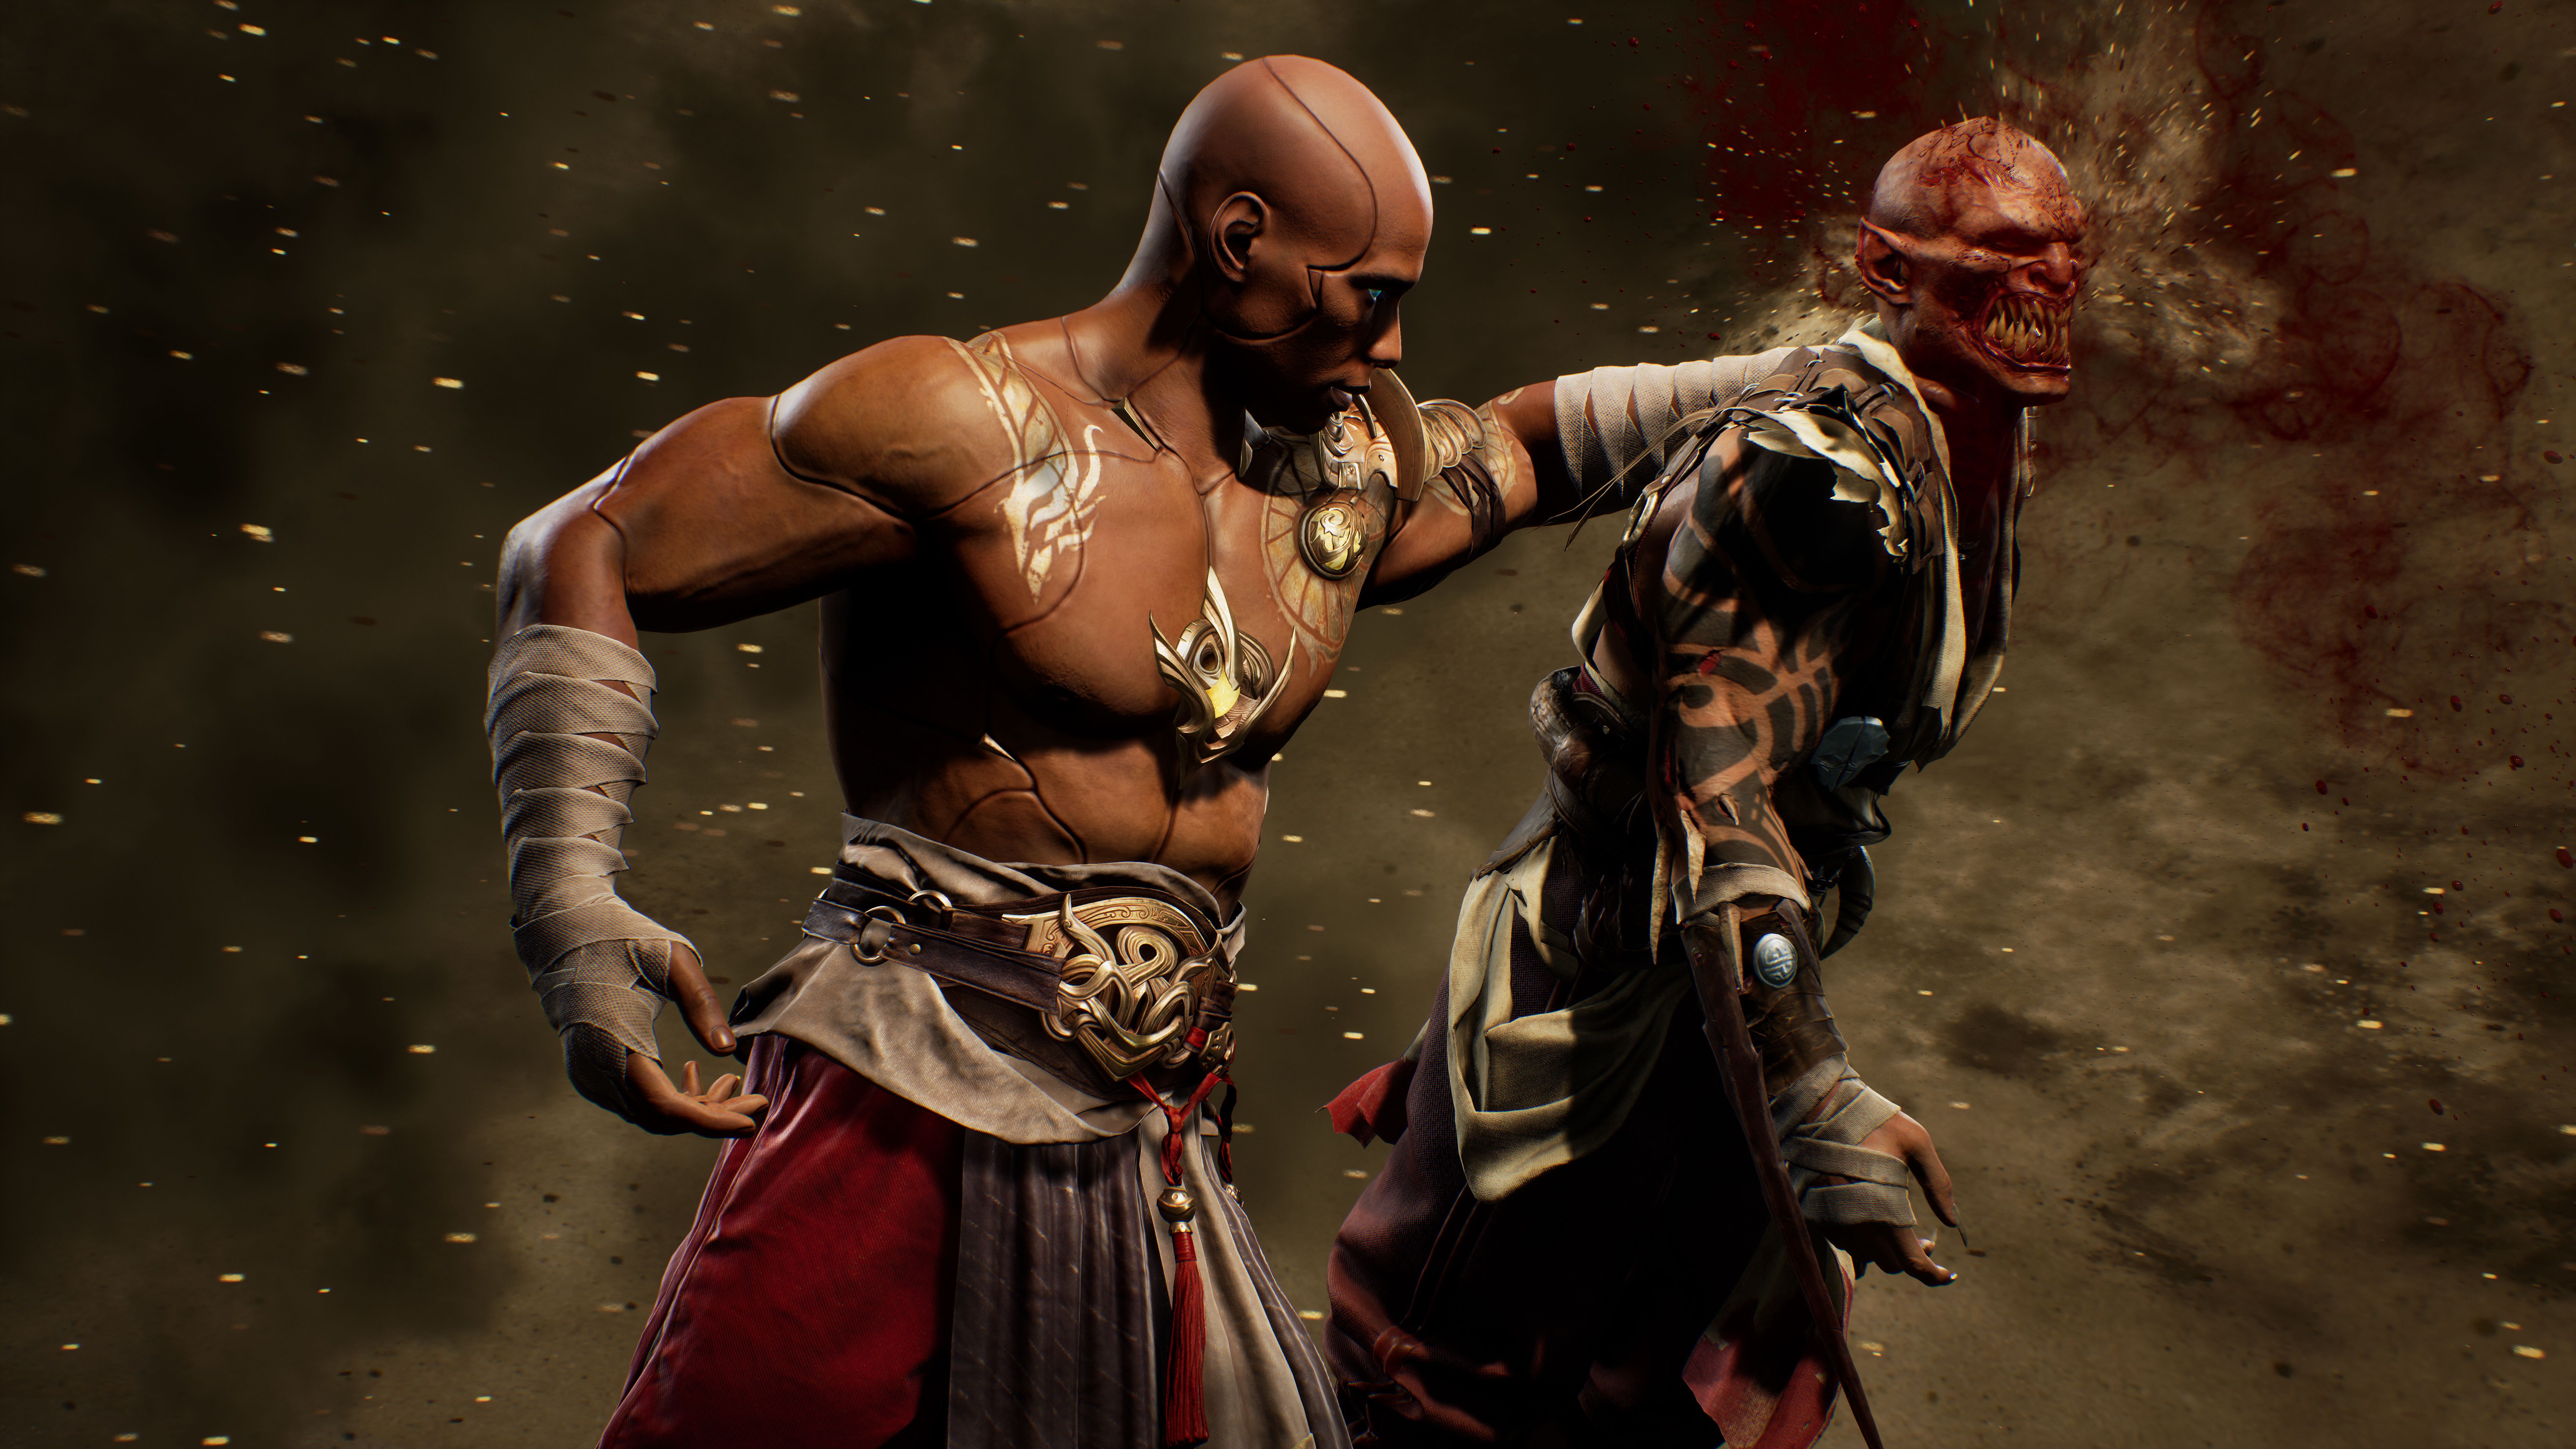 Mortal Kombat 1 review: An exceptional fighting game